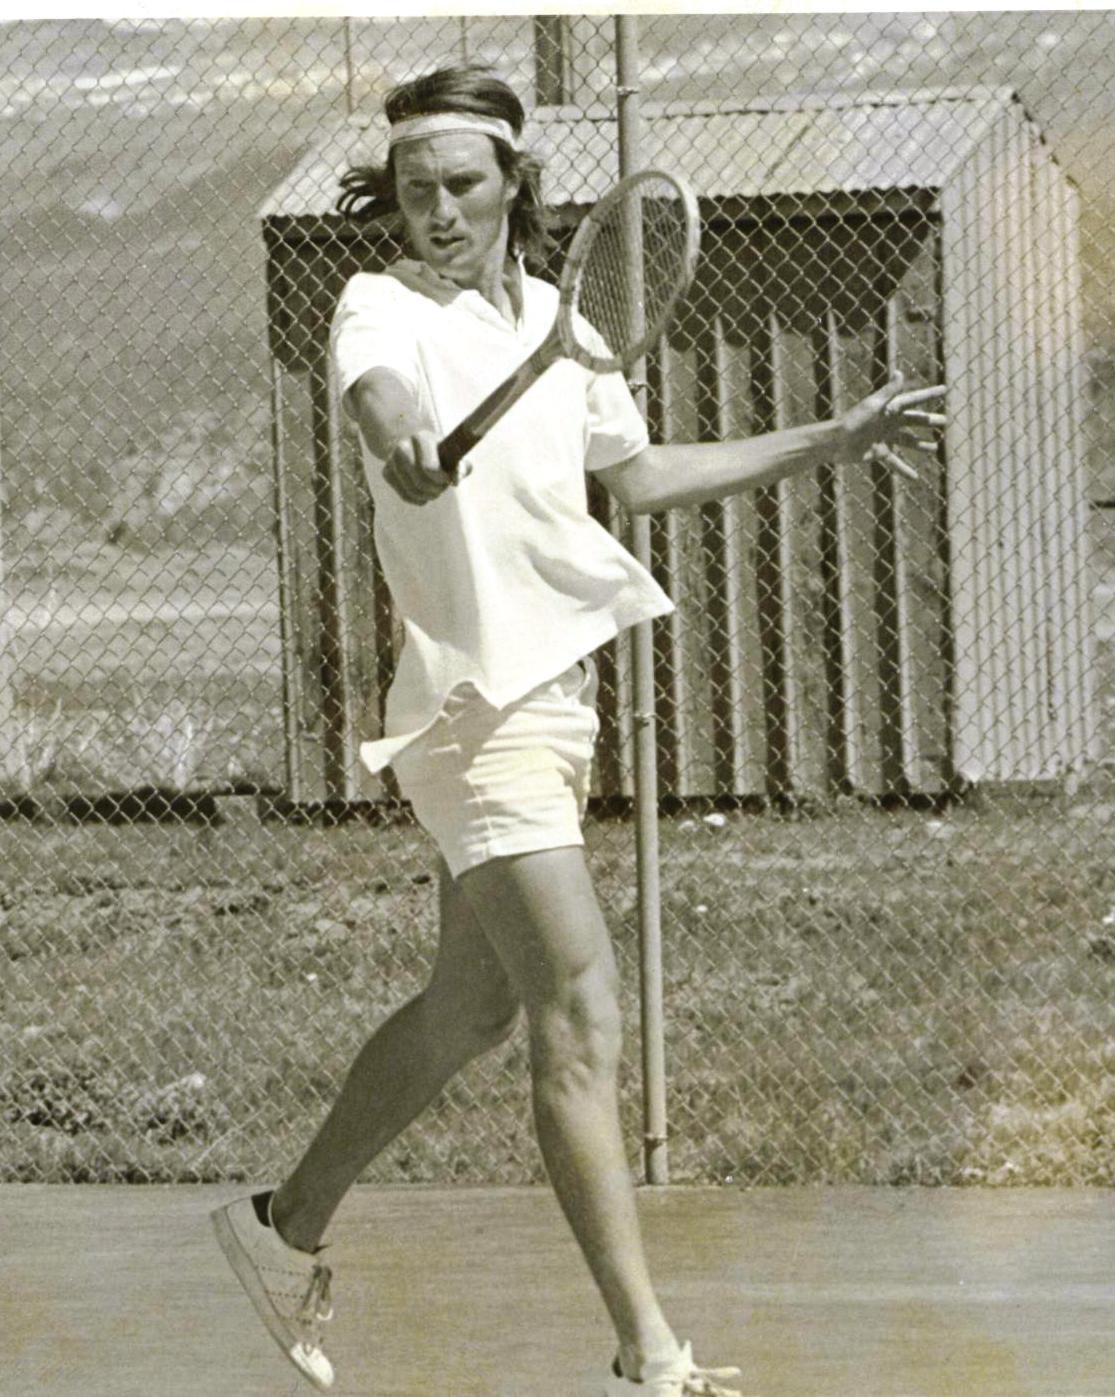 Tennis was more pure...back in the day.